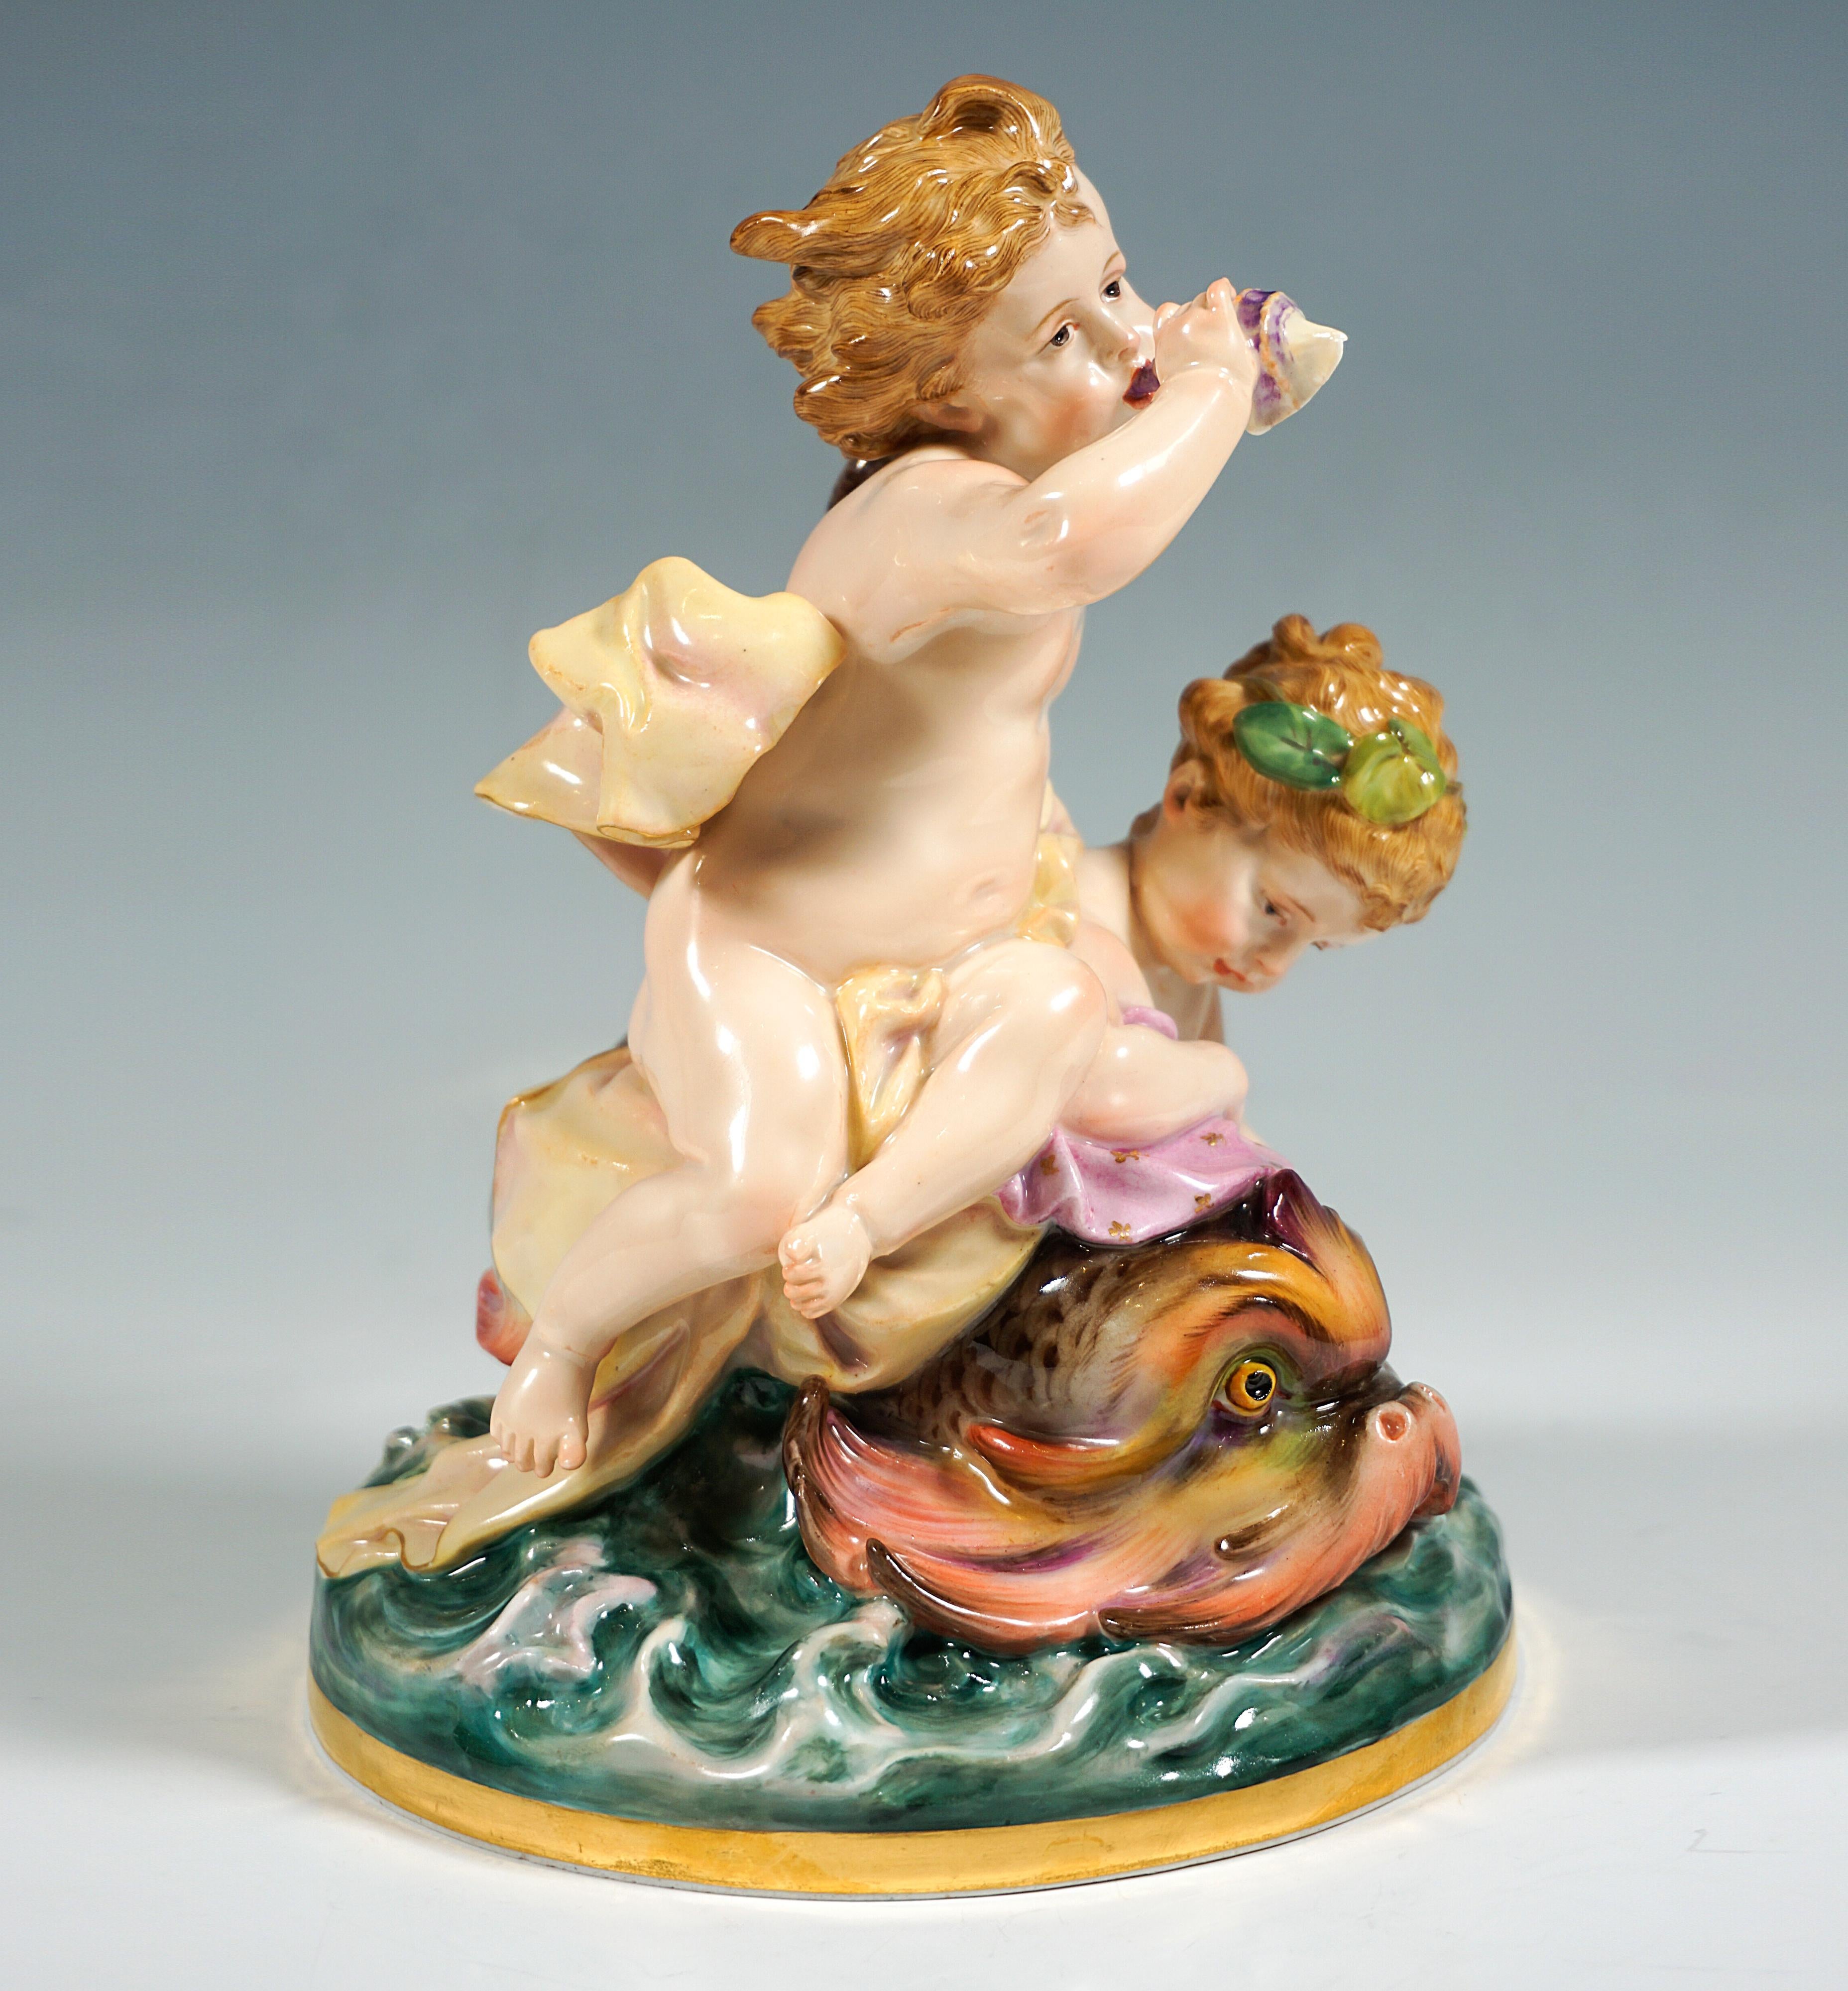 Very rare and loving porcelain figure group of the 19th century:
Two cupids with a dolphin on a restless sea, one of the boys dressed only in cloths sitting on the animal's back and holding on to its raised tail fin, blowing into a snail horn which